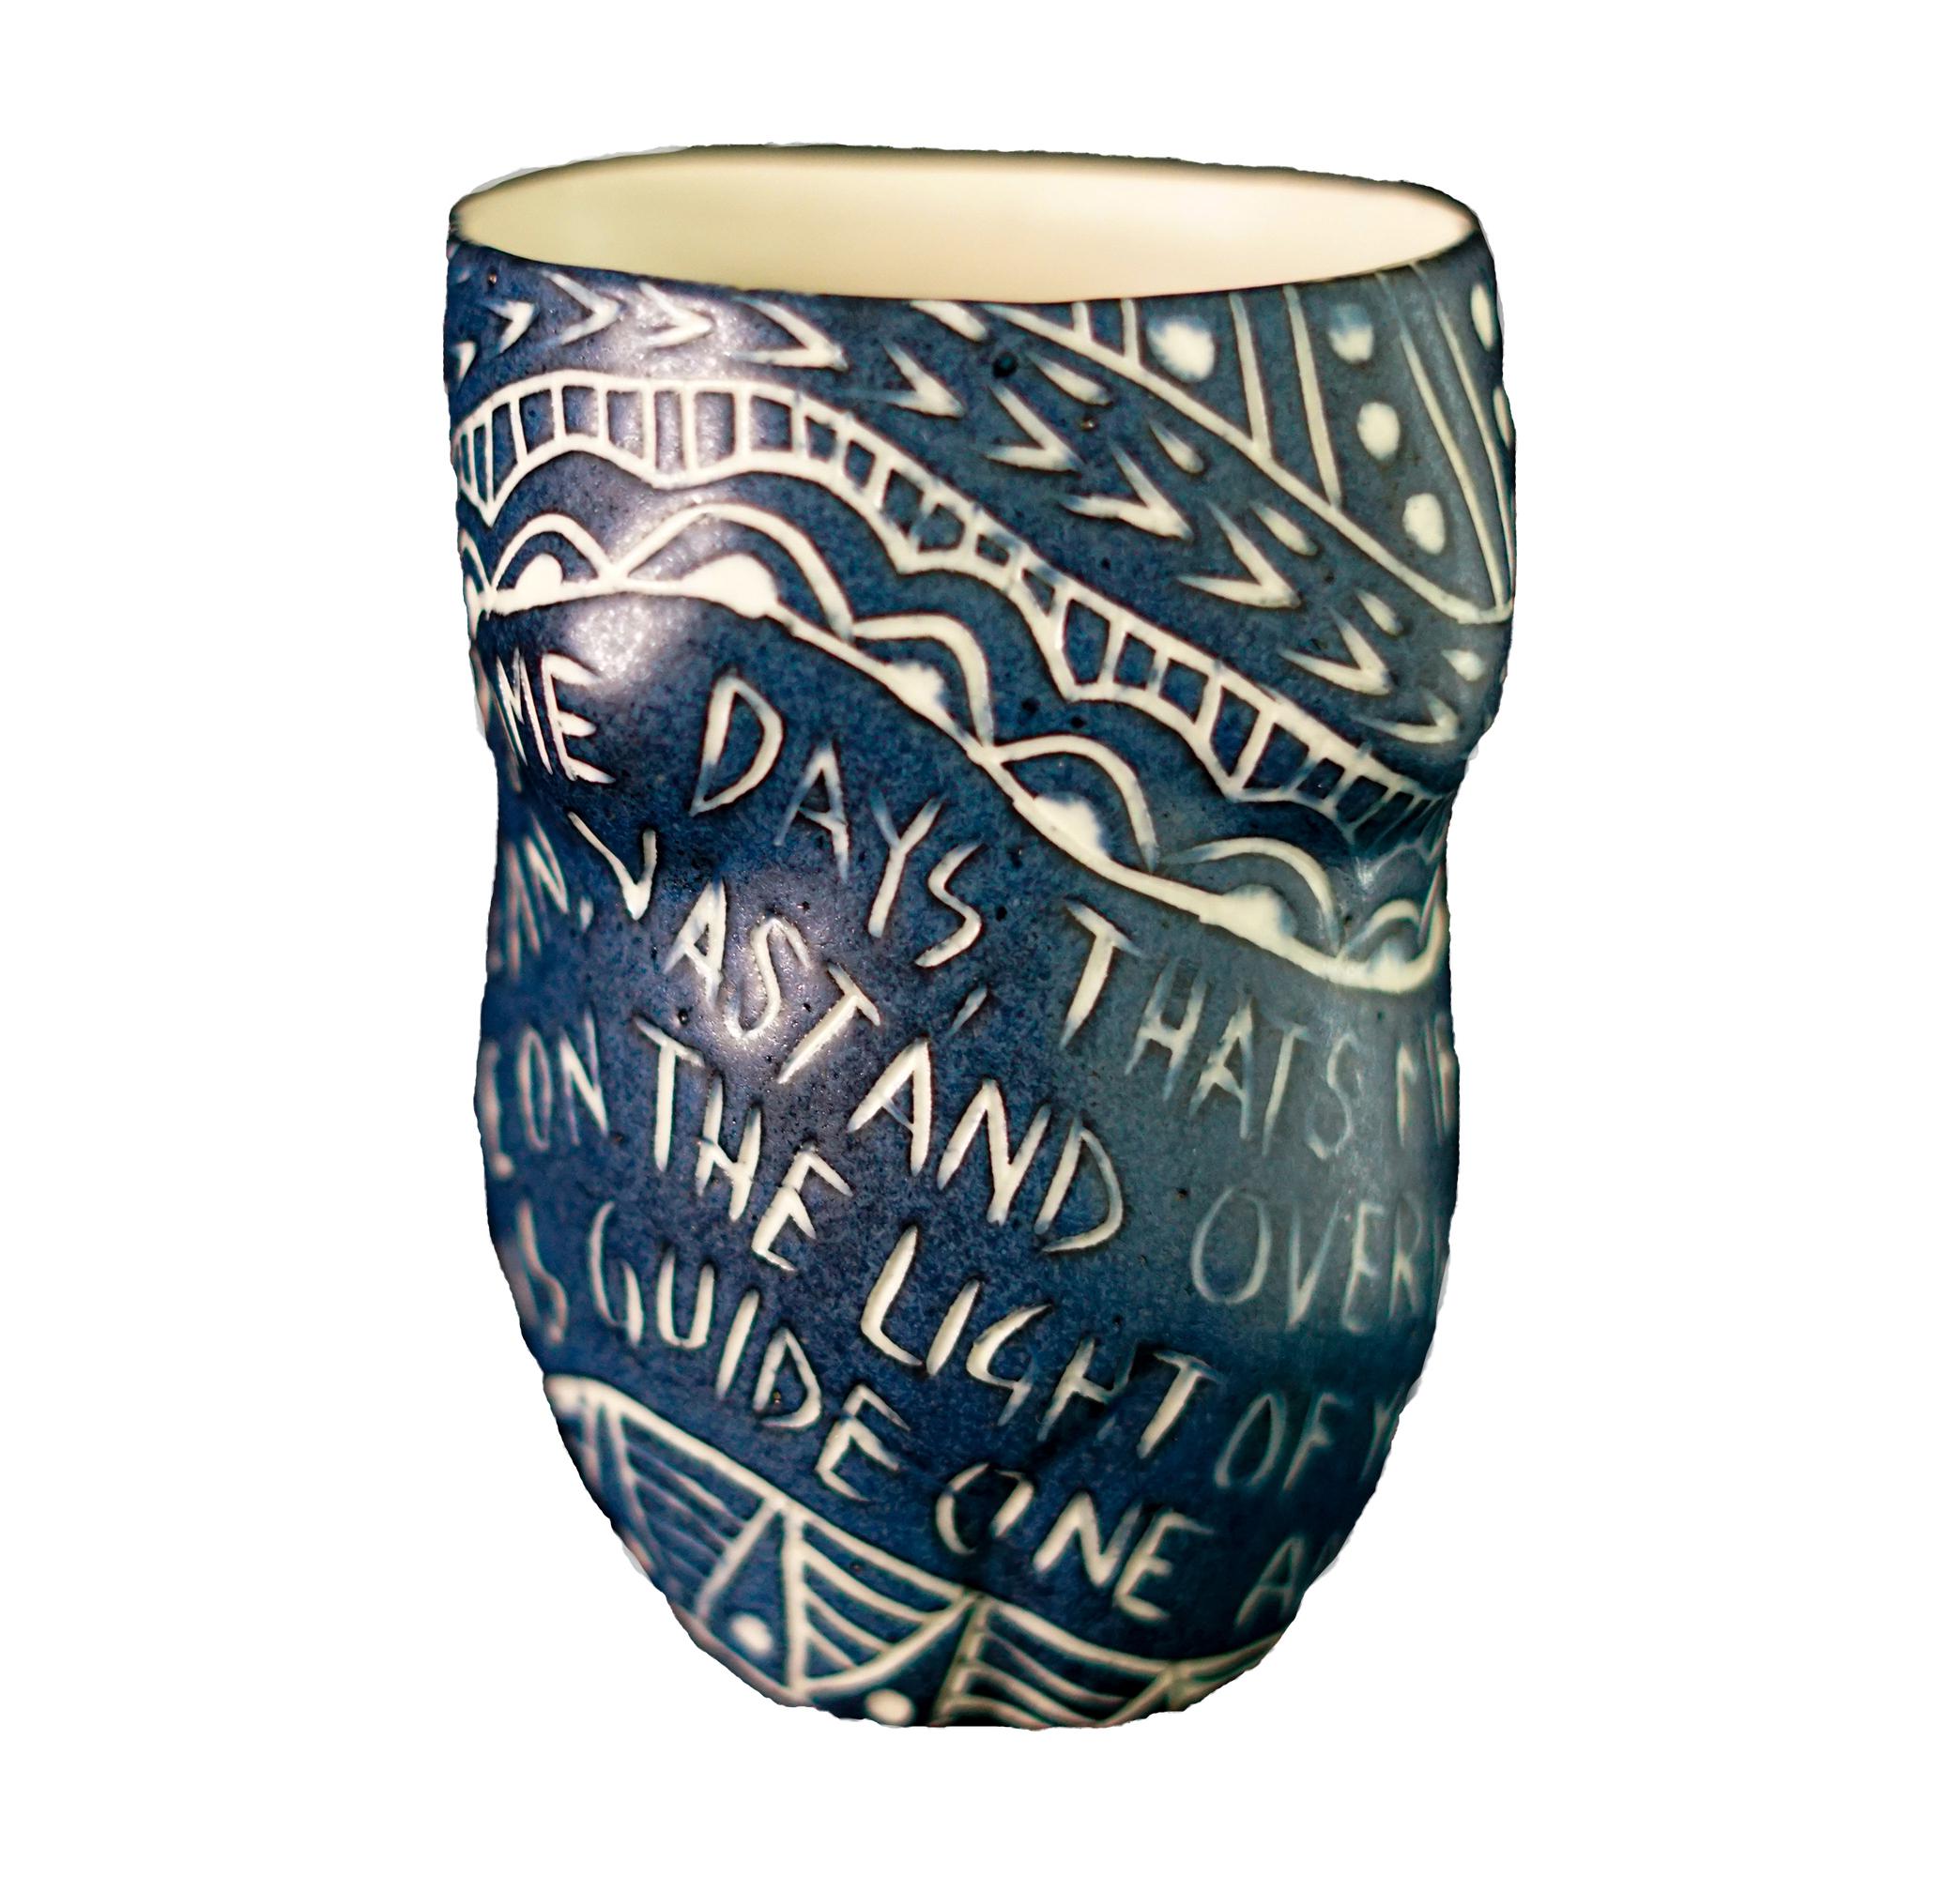 Alex Hodge Figurative Sculpture - Some days that’s me...", Porcelain Cup with Sgraffito Detailing